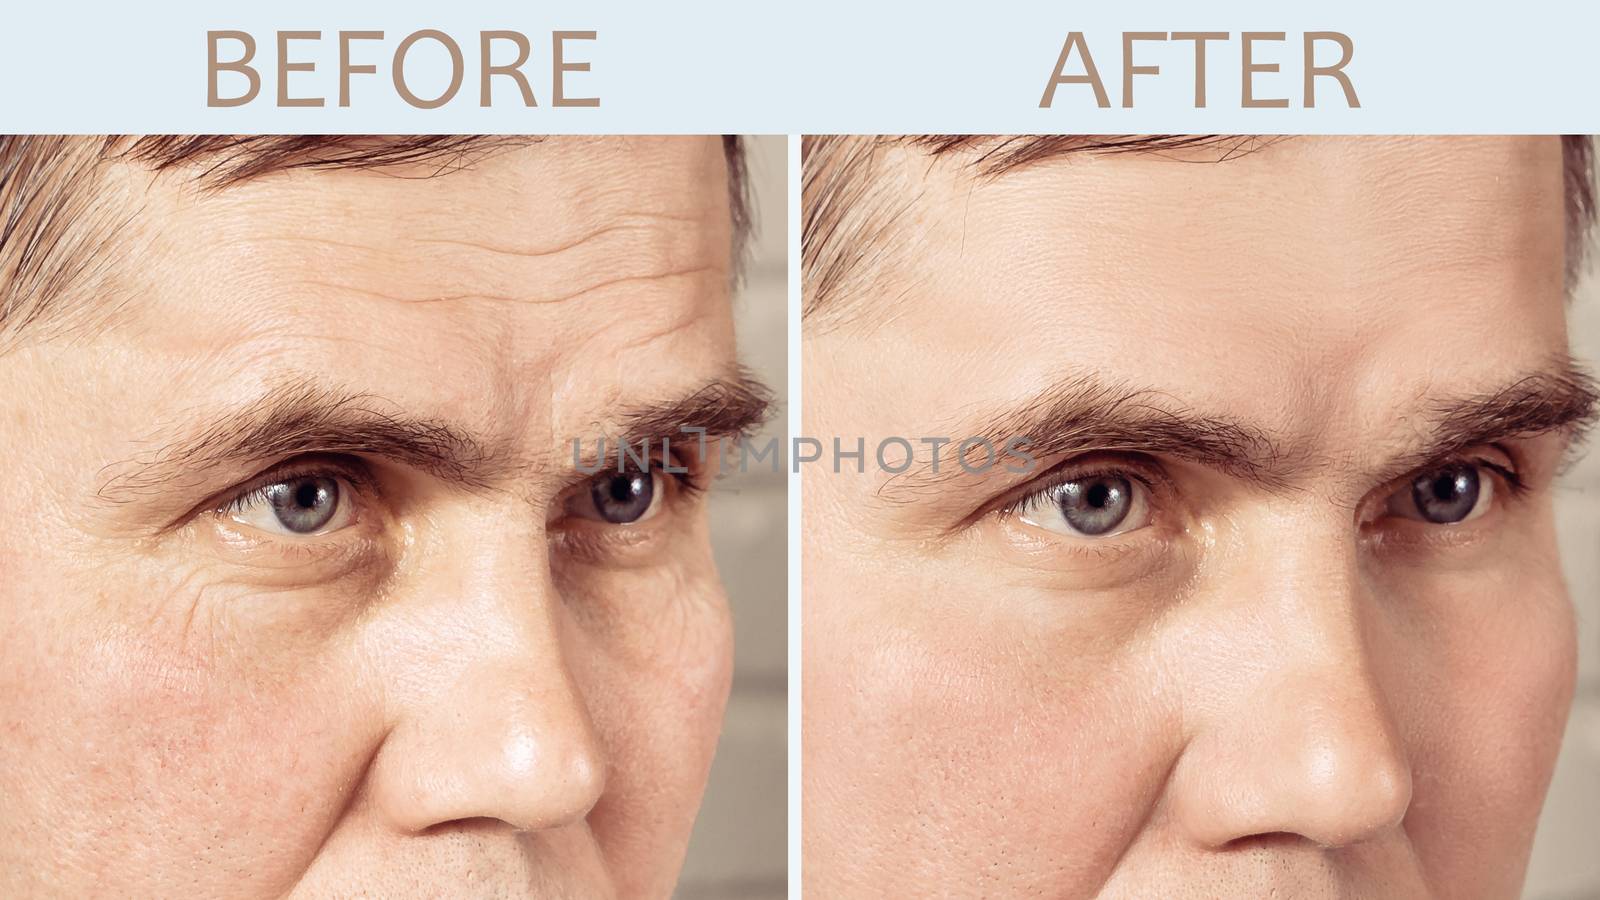 Face of a mature man before and after cosmetic rejuvenating procedures.